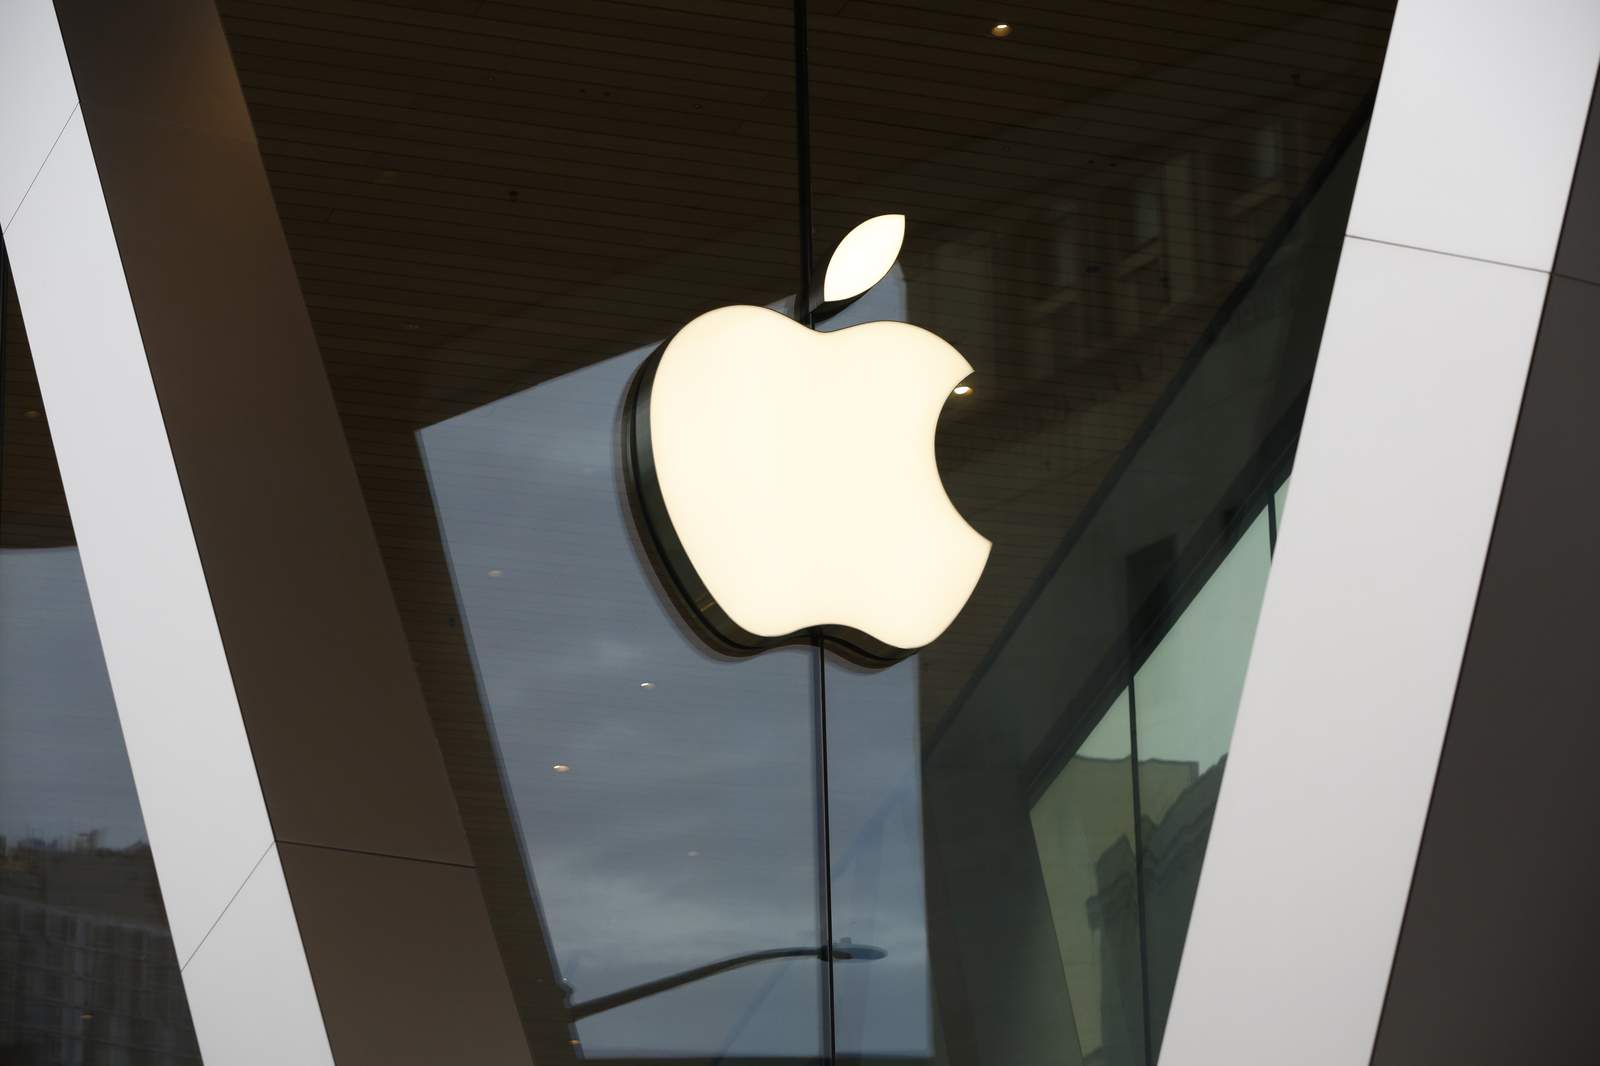 EU opens antitrust probes into Apple Pay and App Store